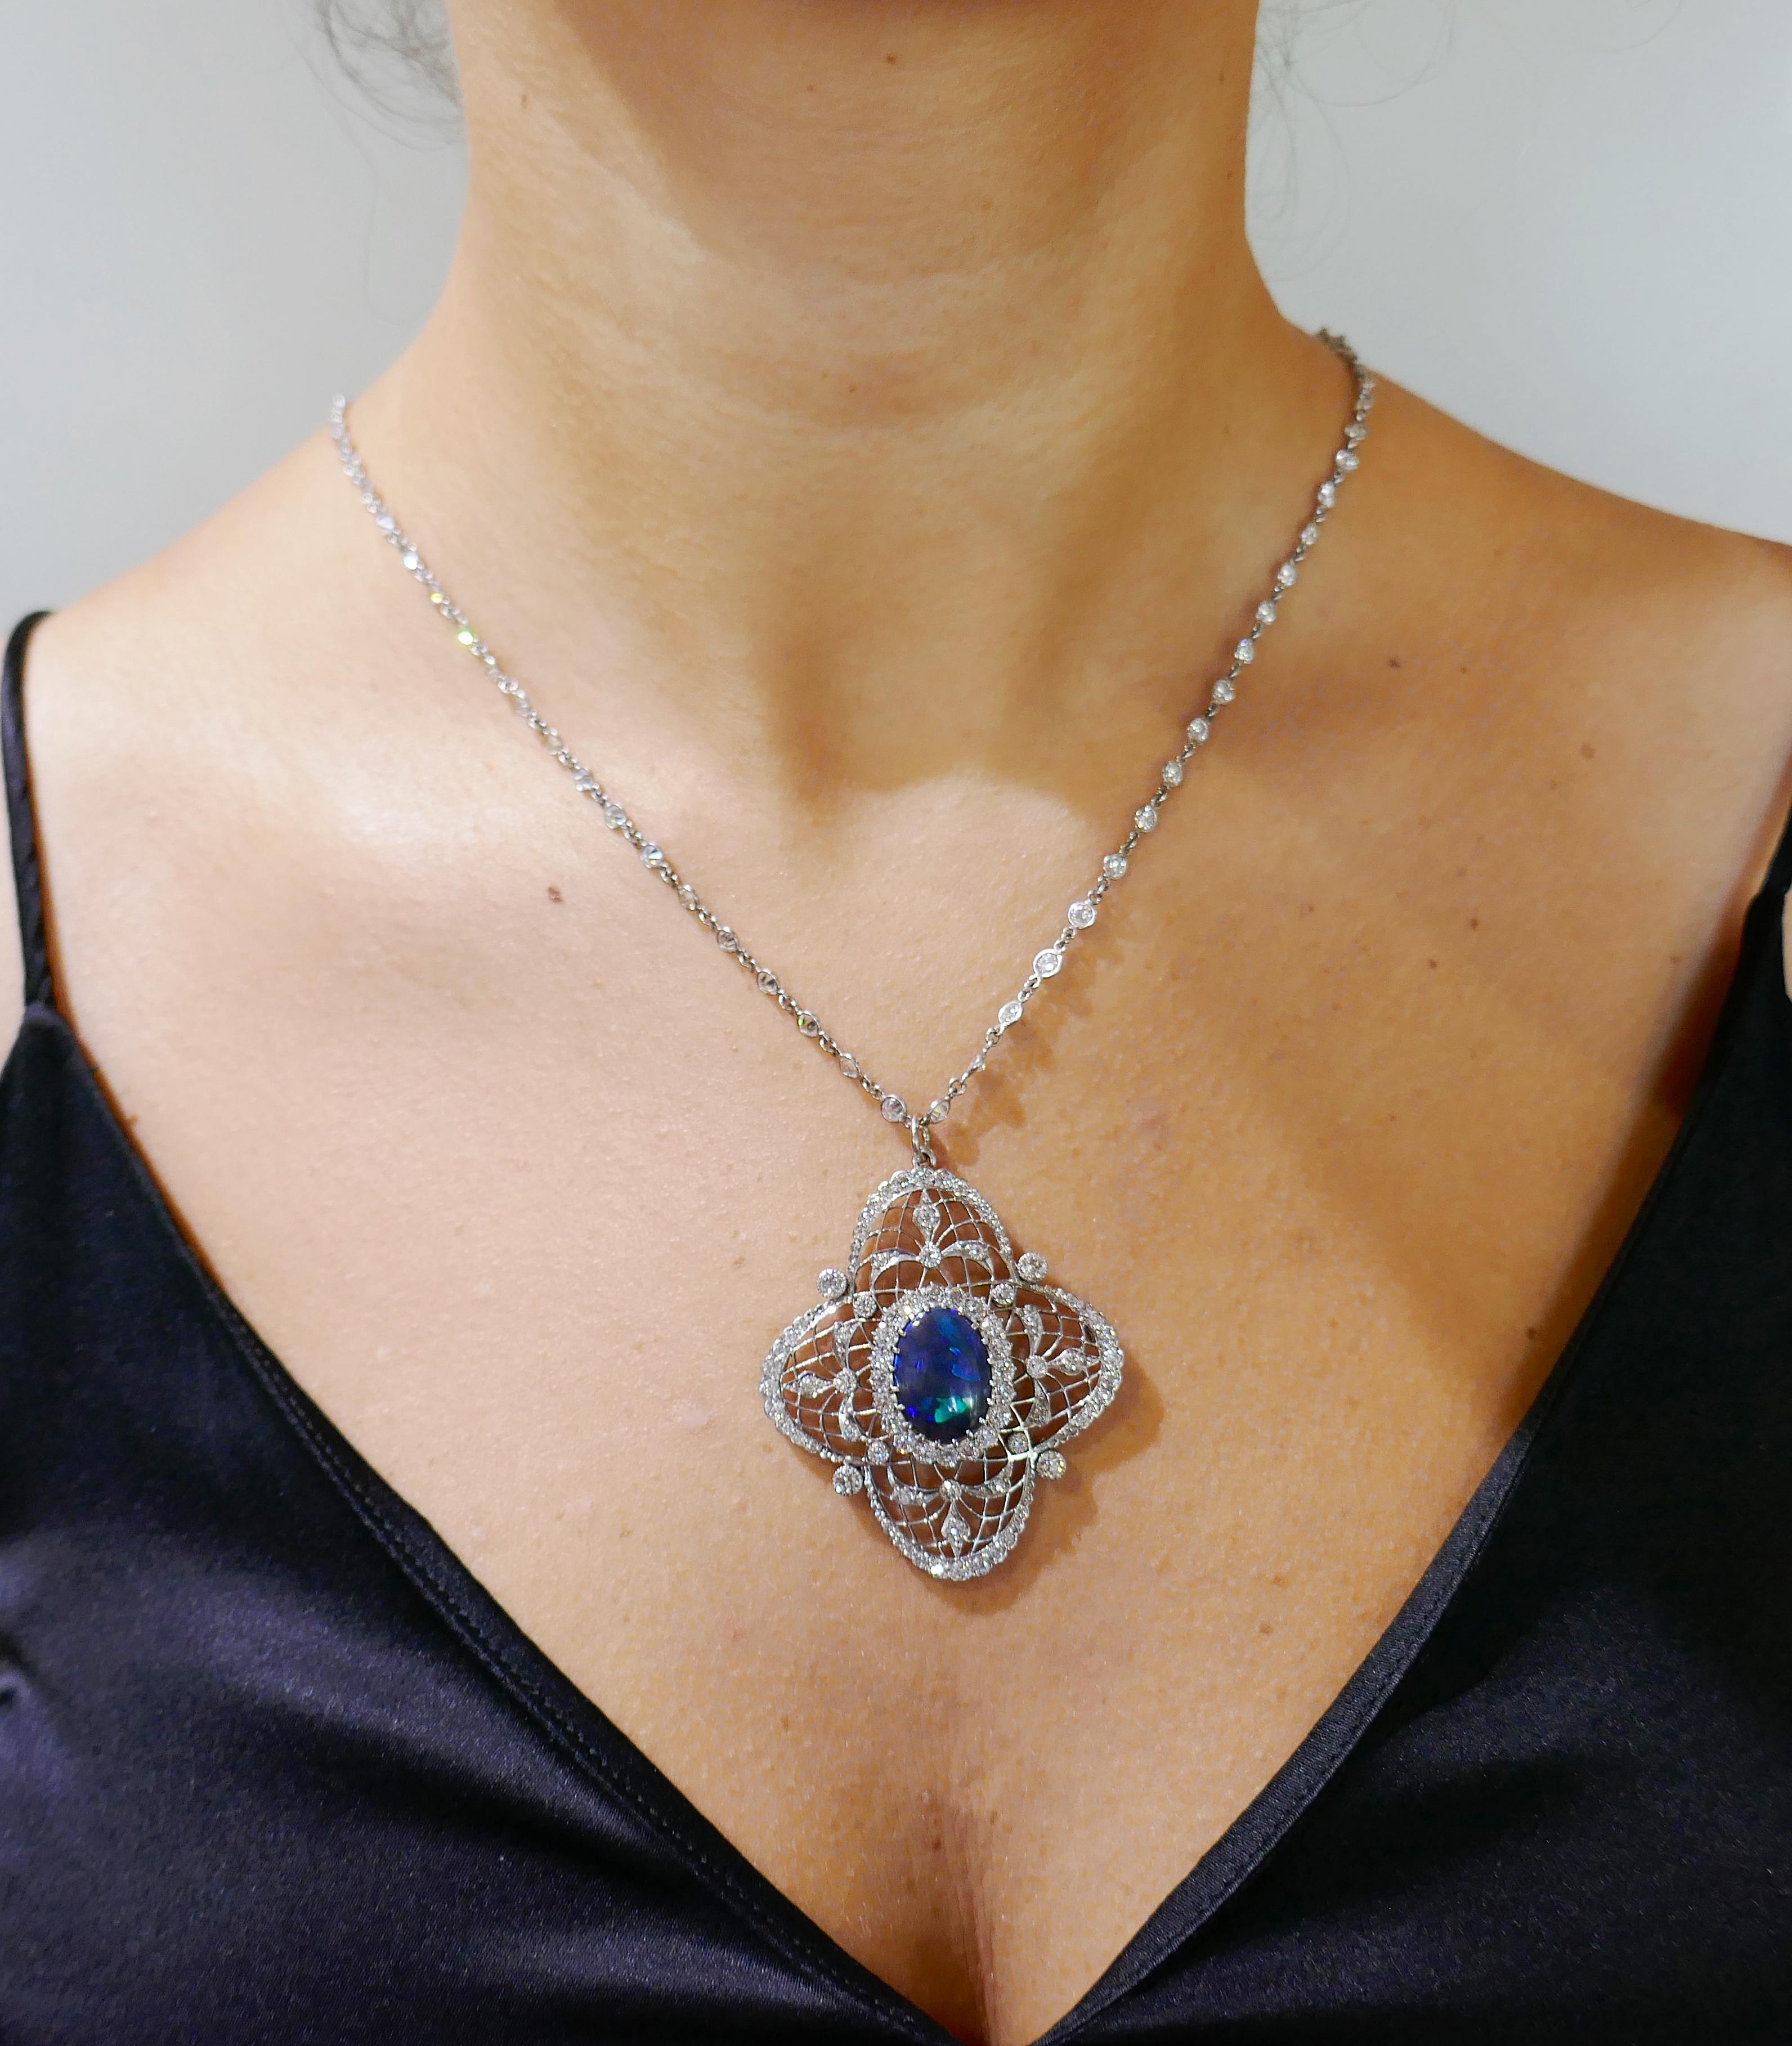 Fabulous pendant created by Bailey Banks & Biddle in the 1910s. Delicate and feminine, the pendant is a great addition to your jewelry collection. 
The pendant features an oval cabochon black opal intricately framed by Old European cut diamonds set